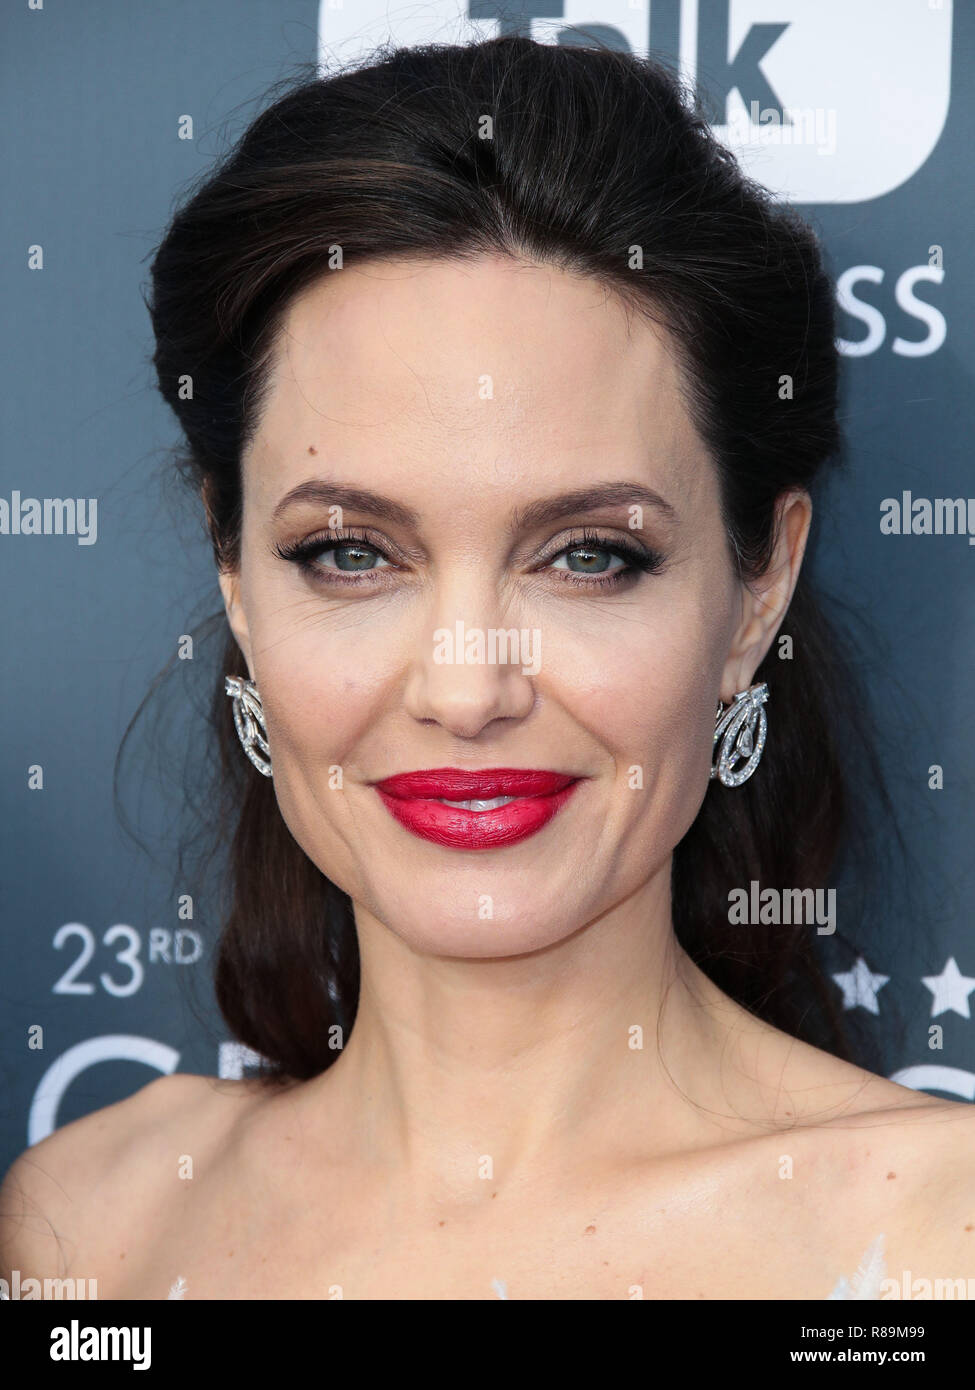 File Angelina Jolie Looks Nearly Unrecognizable As A Blonde For